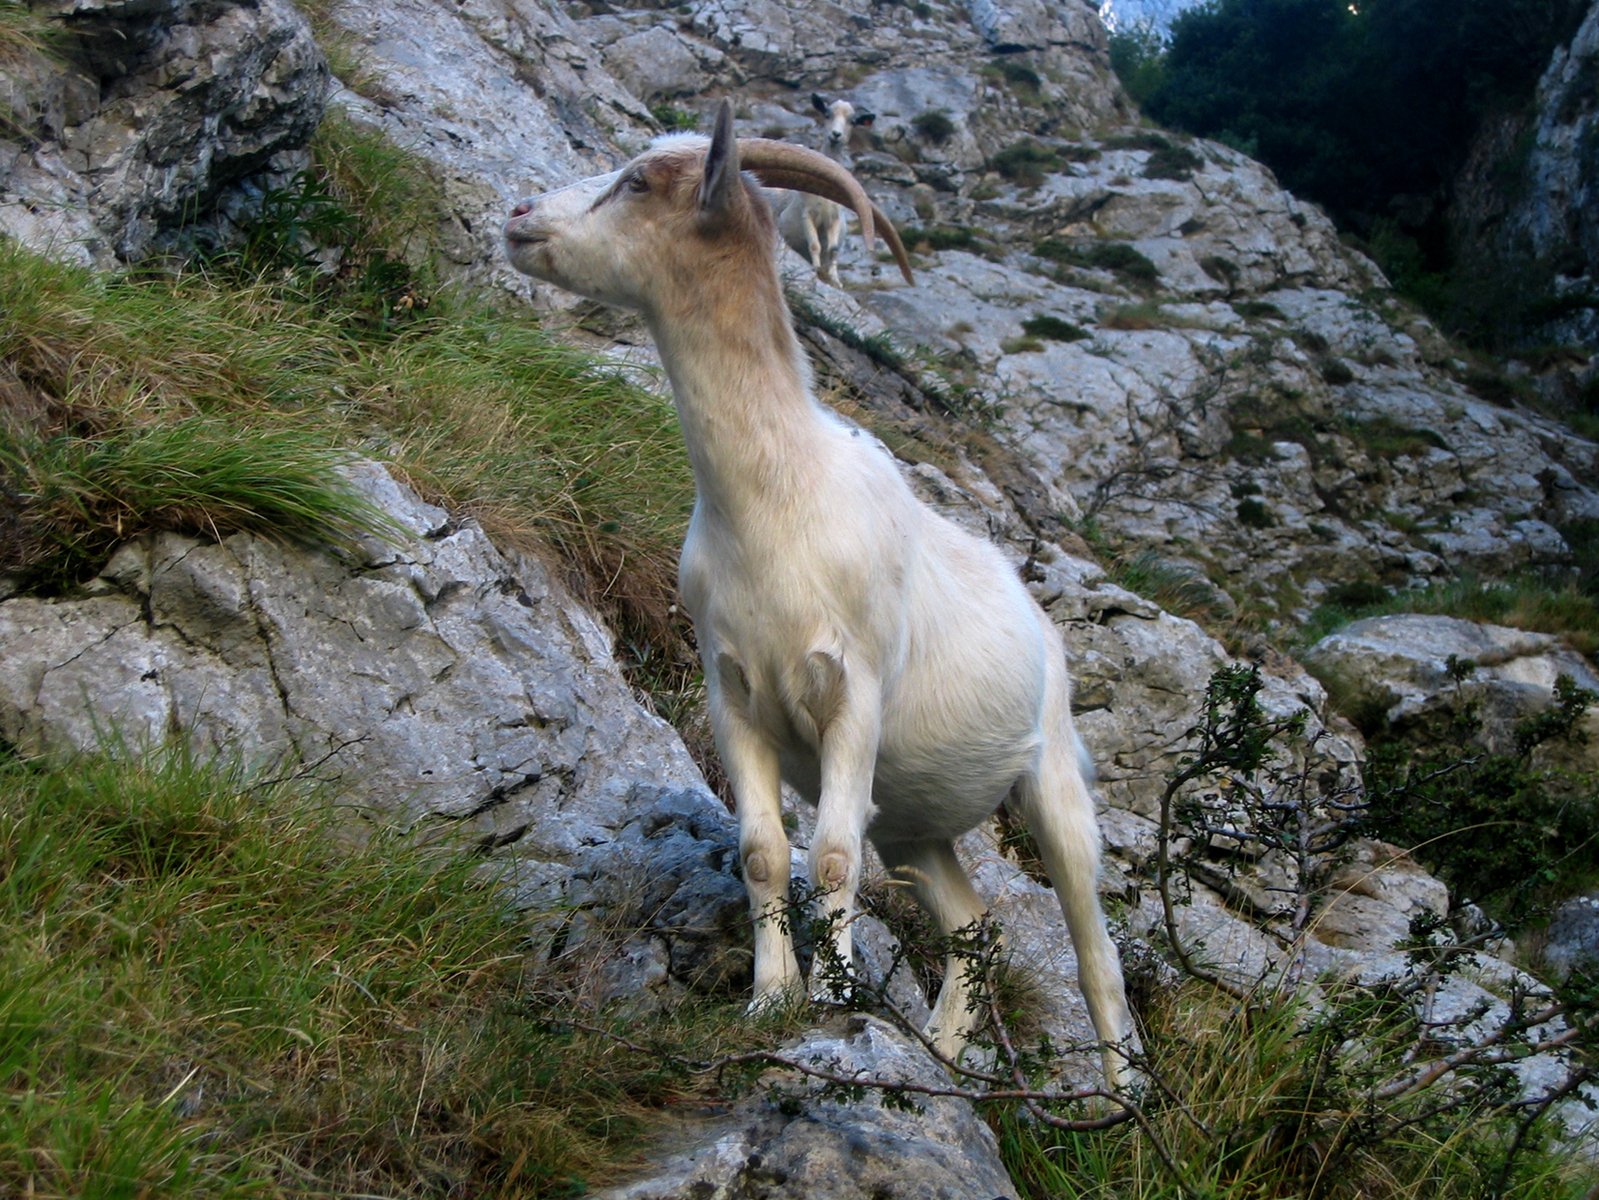 a goat climbing up a hill with rocks in the background